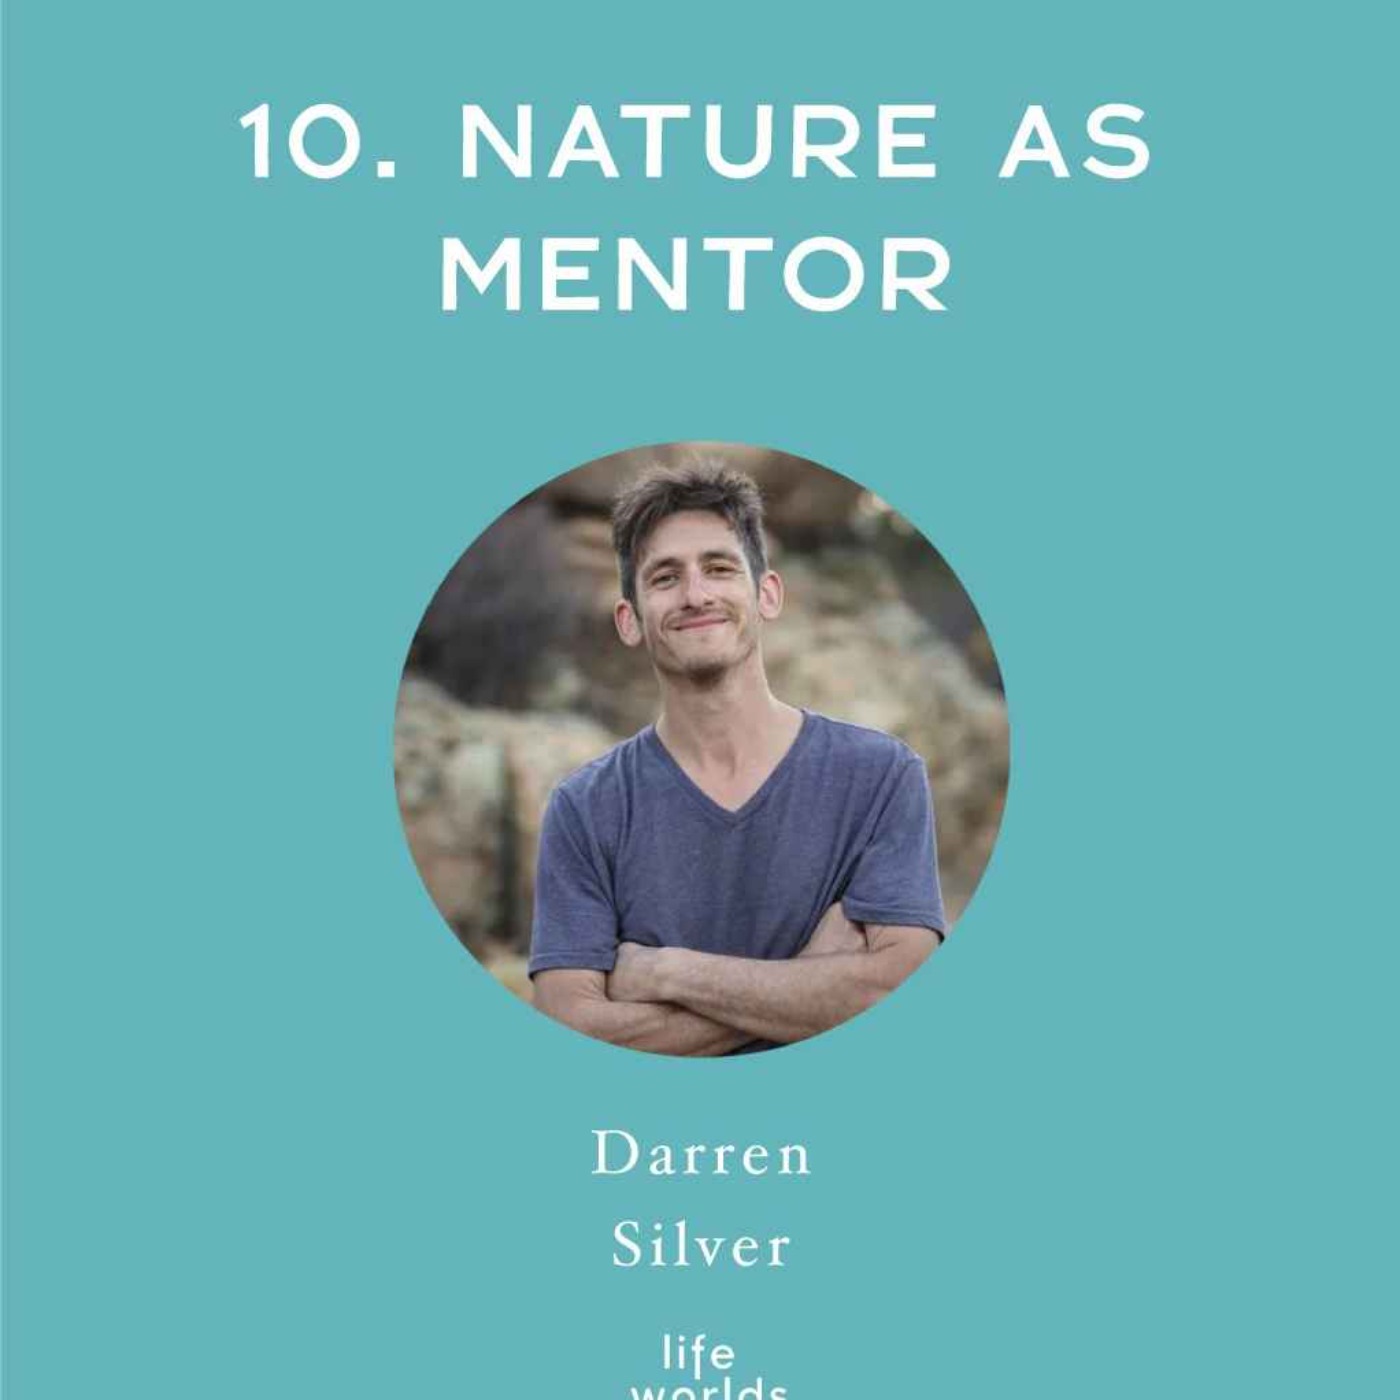 [Full Interview] Nature as Mentor - with Darren Silver